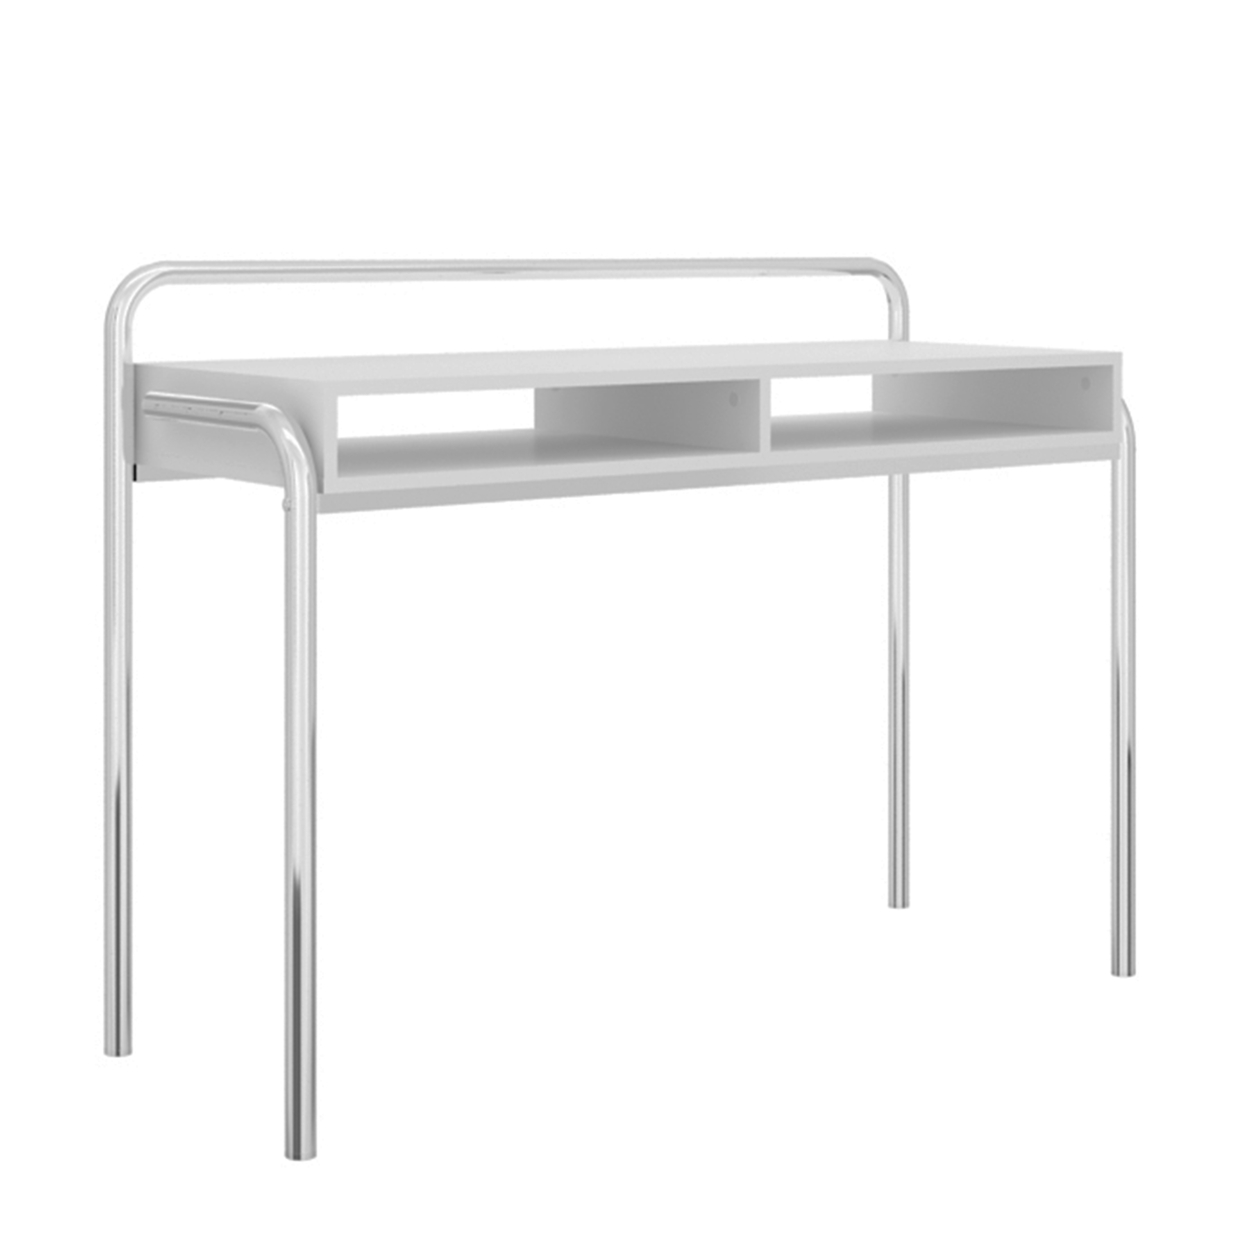 Office Desk With 2 Compartments And Tubular Metal Frame, White And Chrome- Saltoro Sherpi